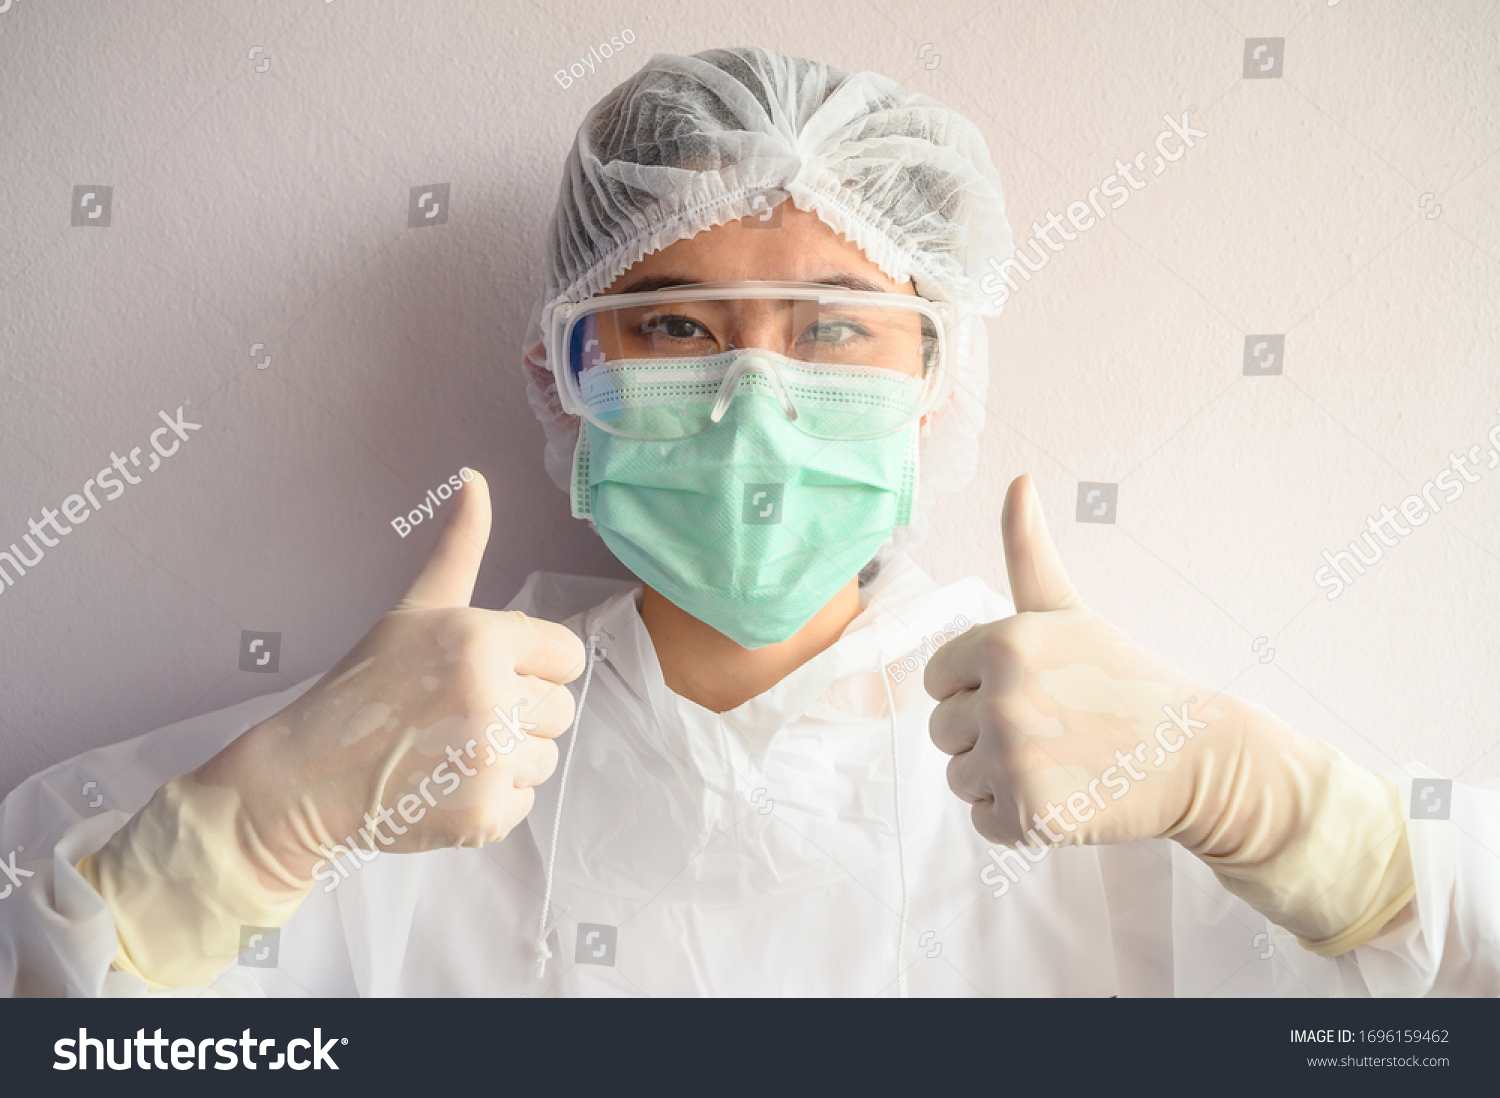 Nurse wearing PPE suit with mask for protect virus and showing thumbs up. In coronavirus pandemic outbreak we should support and encourage healthcare worker by stay home and listen to medical advice. #1696159462